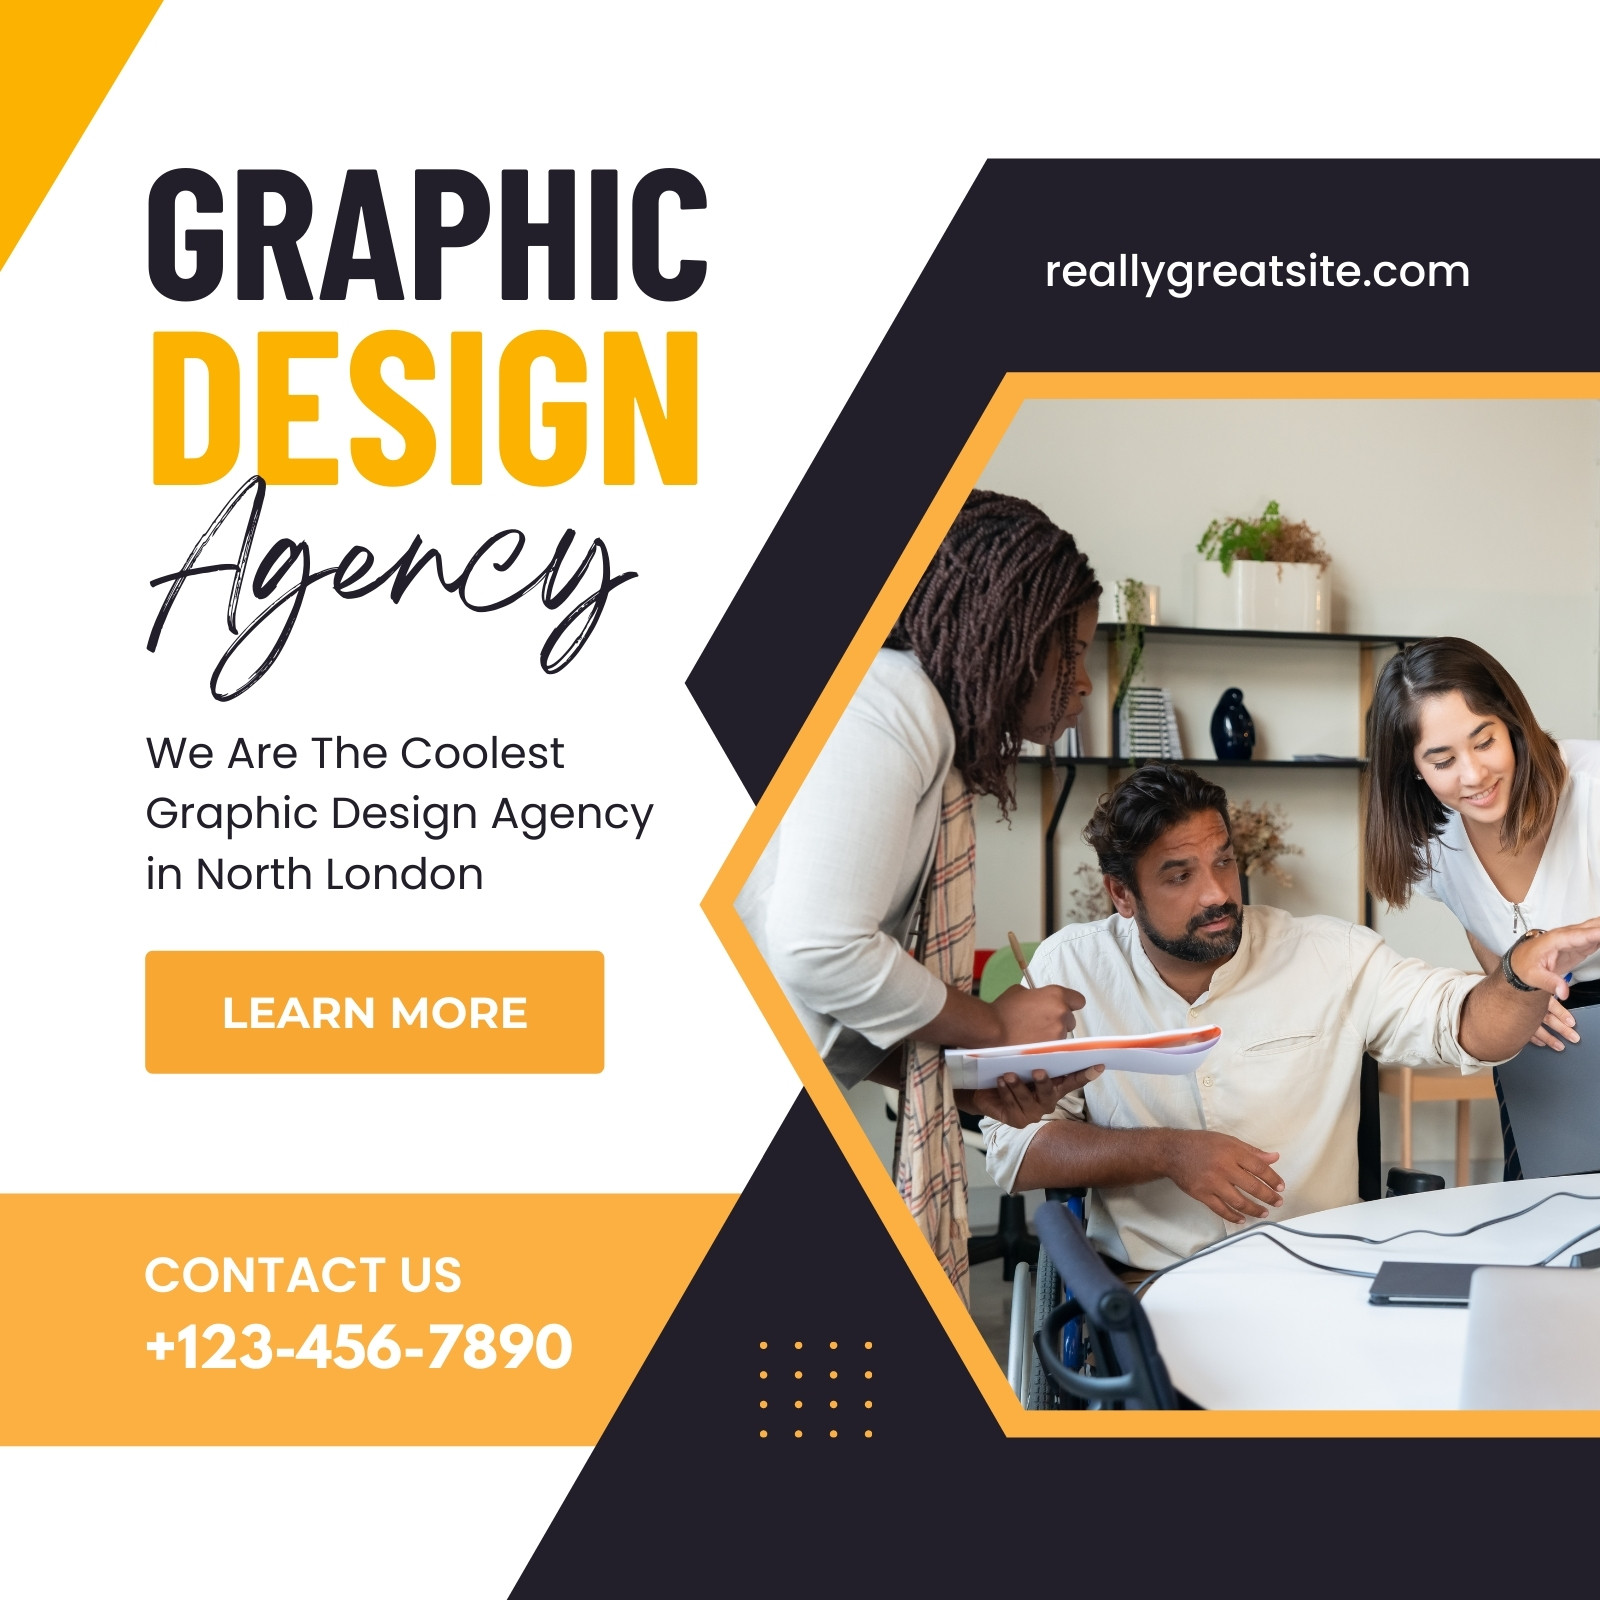 Free and customizable social graphic templates | Canva